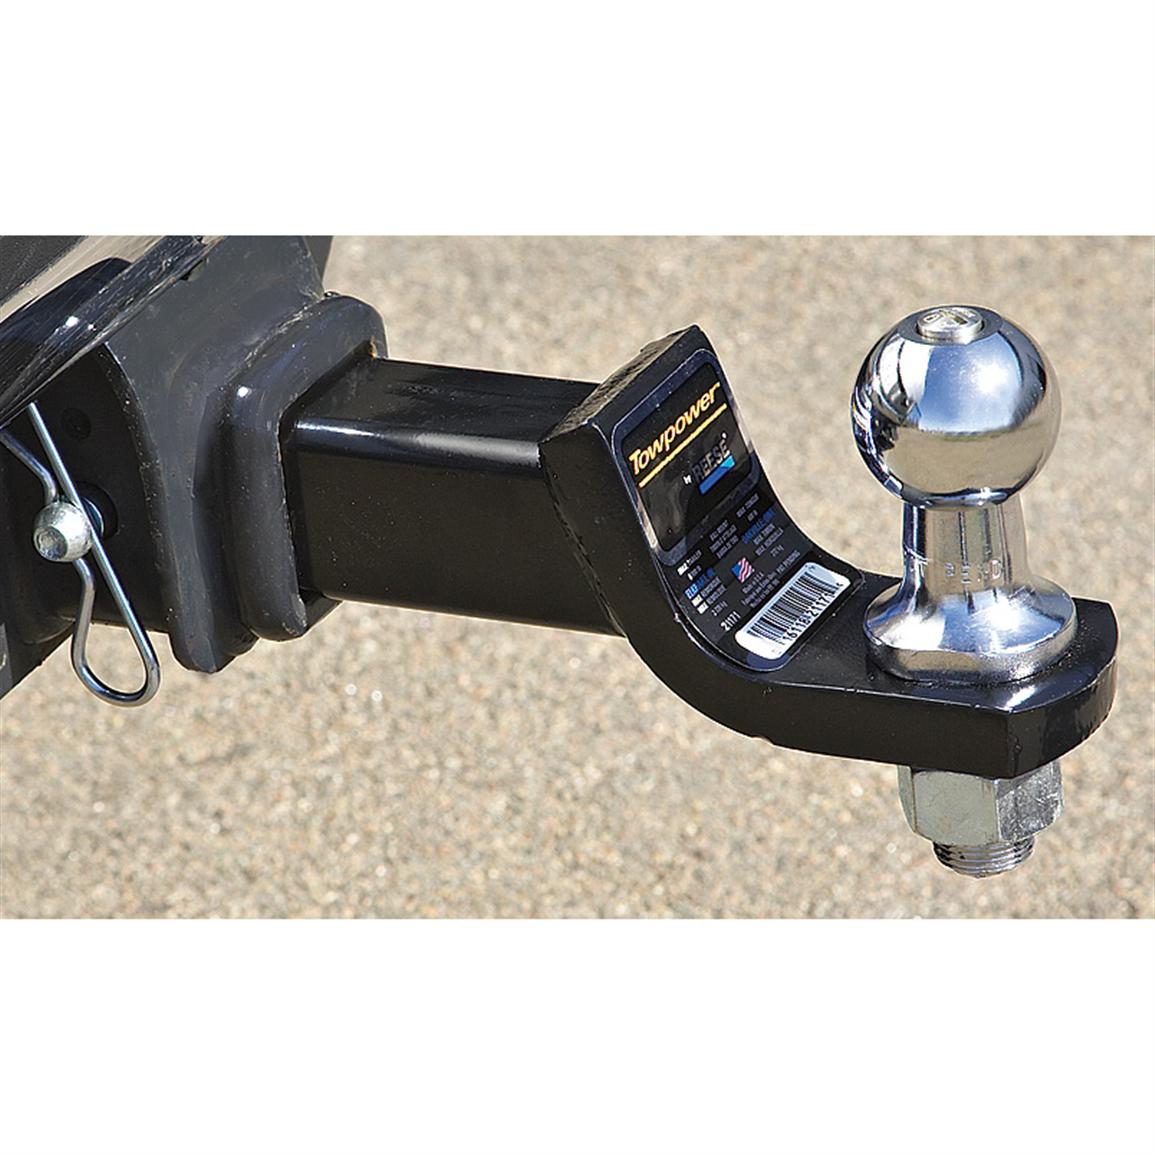 reese-interchangeable-hitch-ball-towing-kit-162487-towing-at